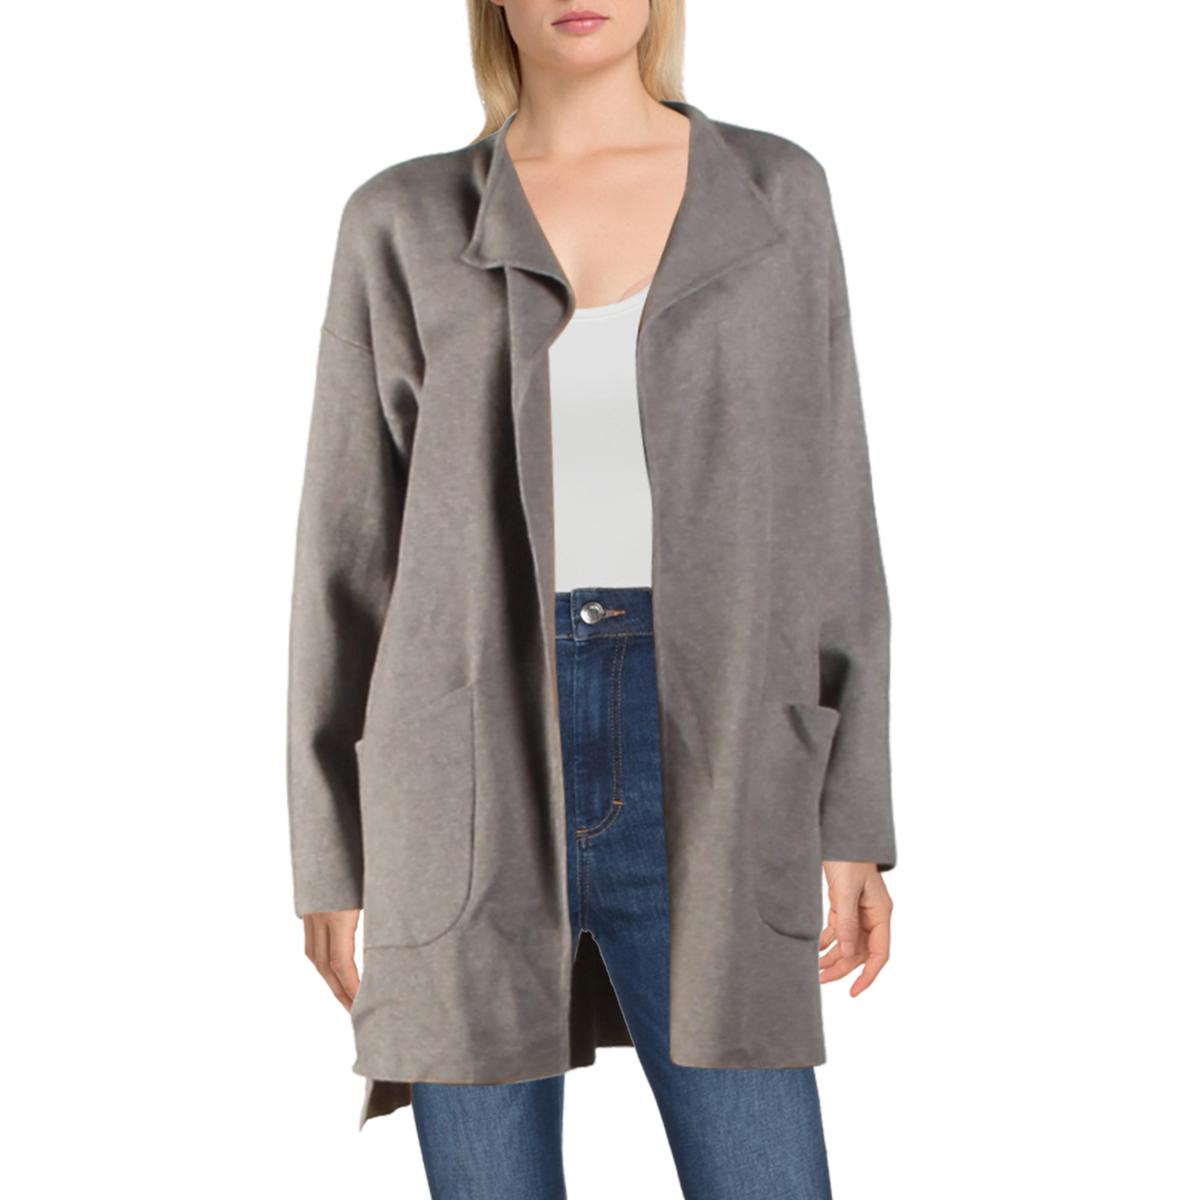 Athleisure by SIONI Womens Gray Long Duster Cardigan Sweater Jacket M ...